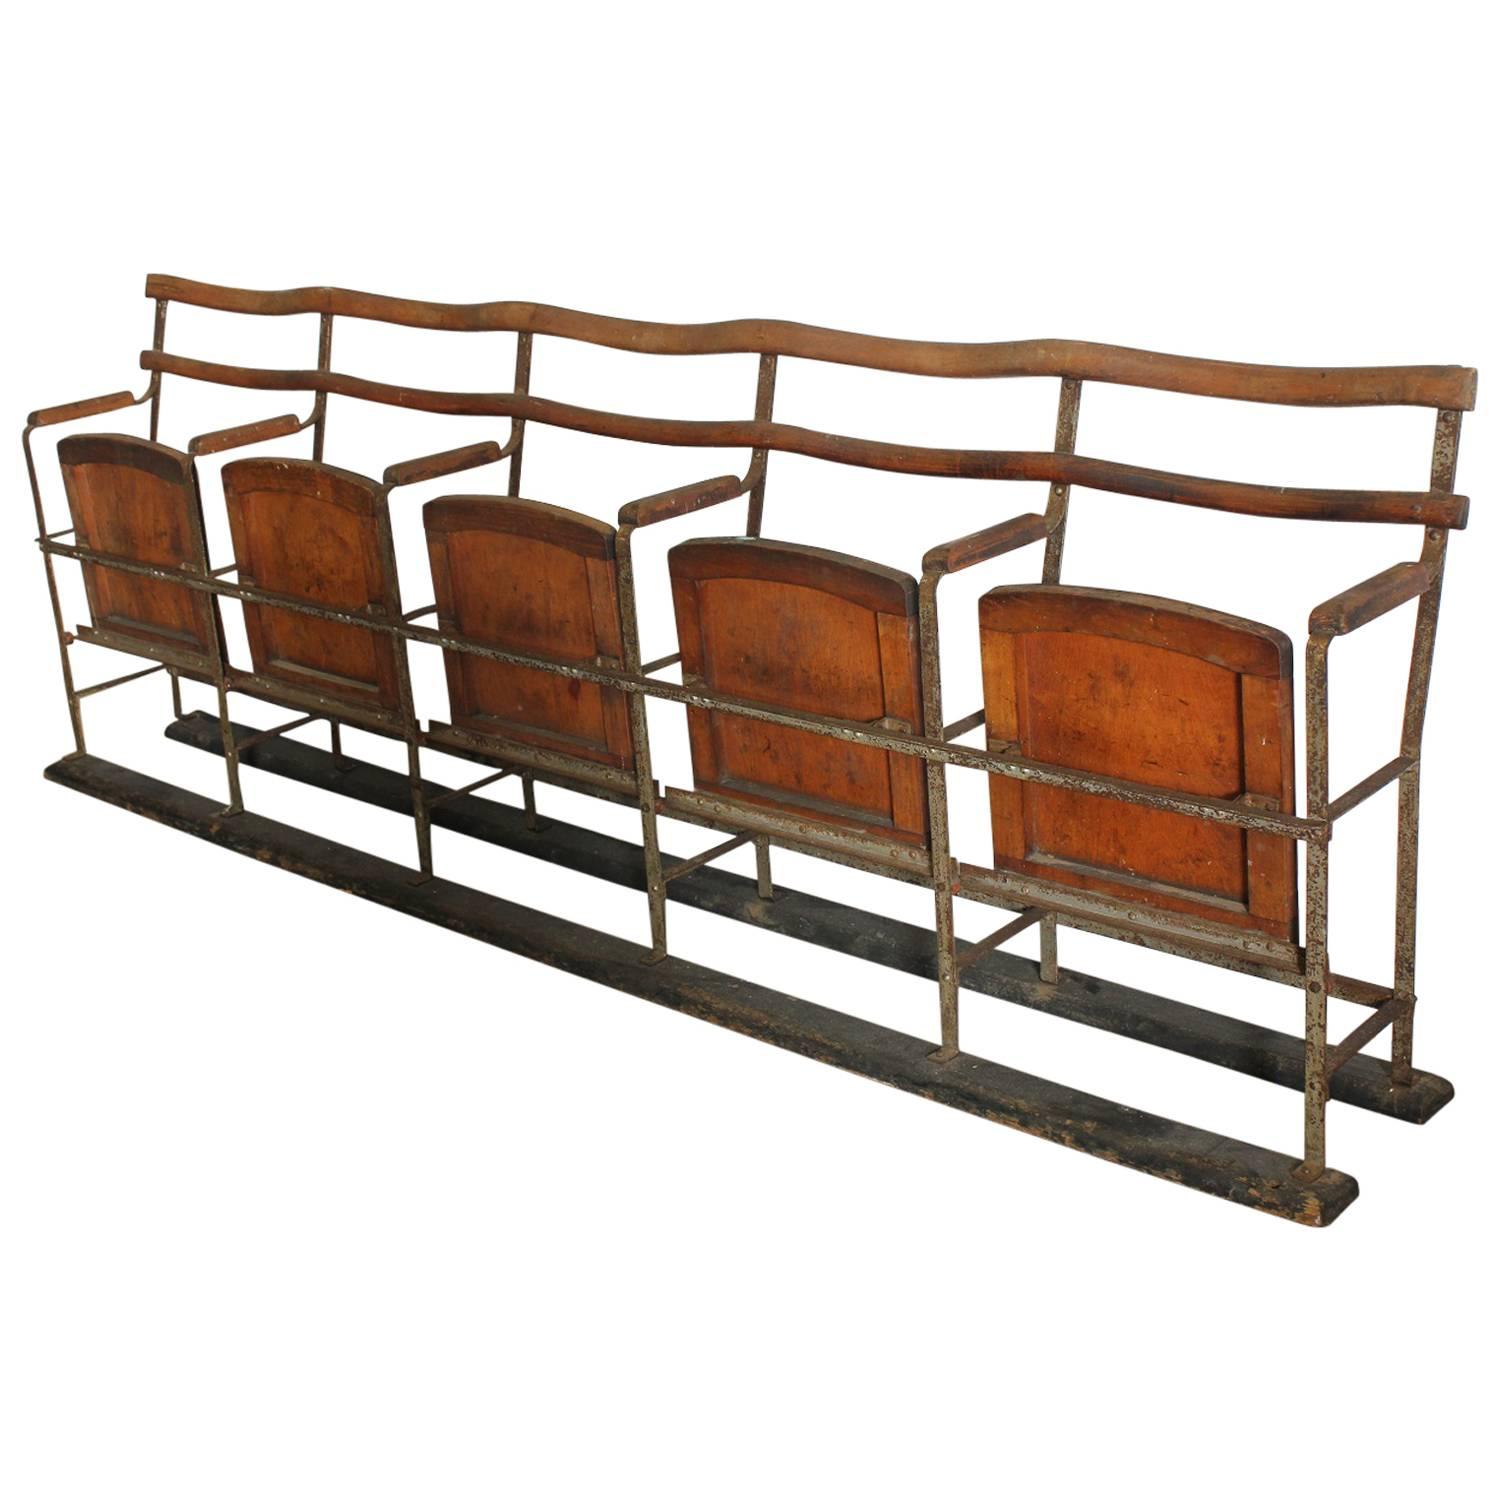 Antique Theater Five-Seat Folding Bench